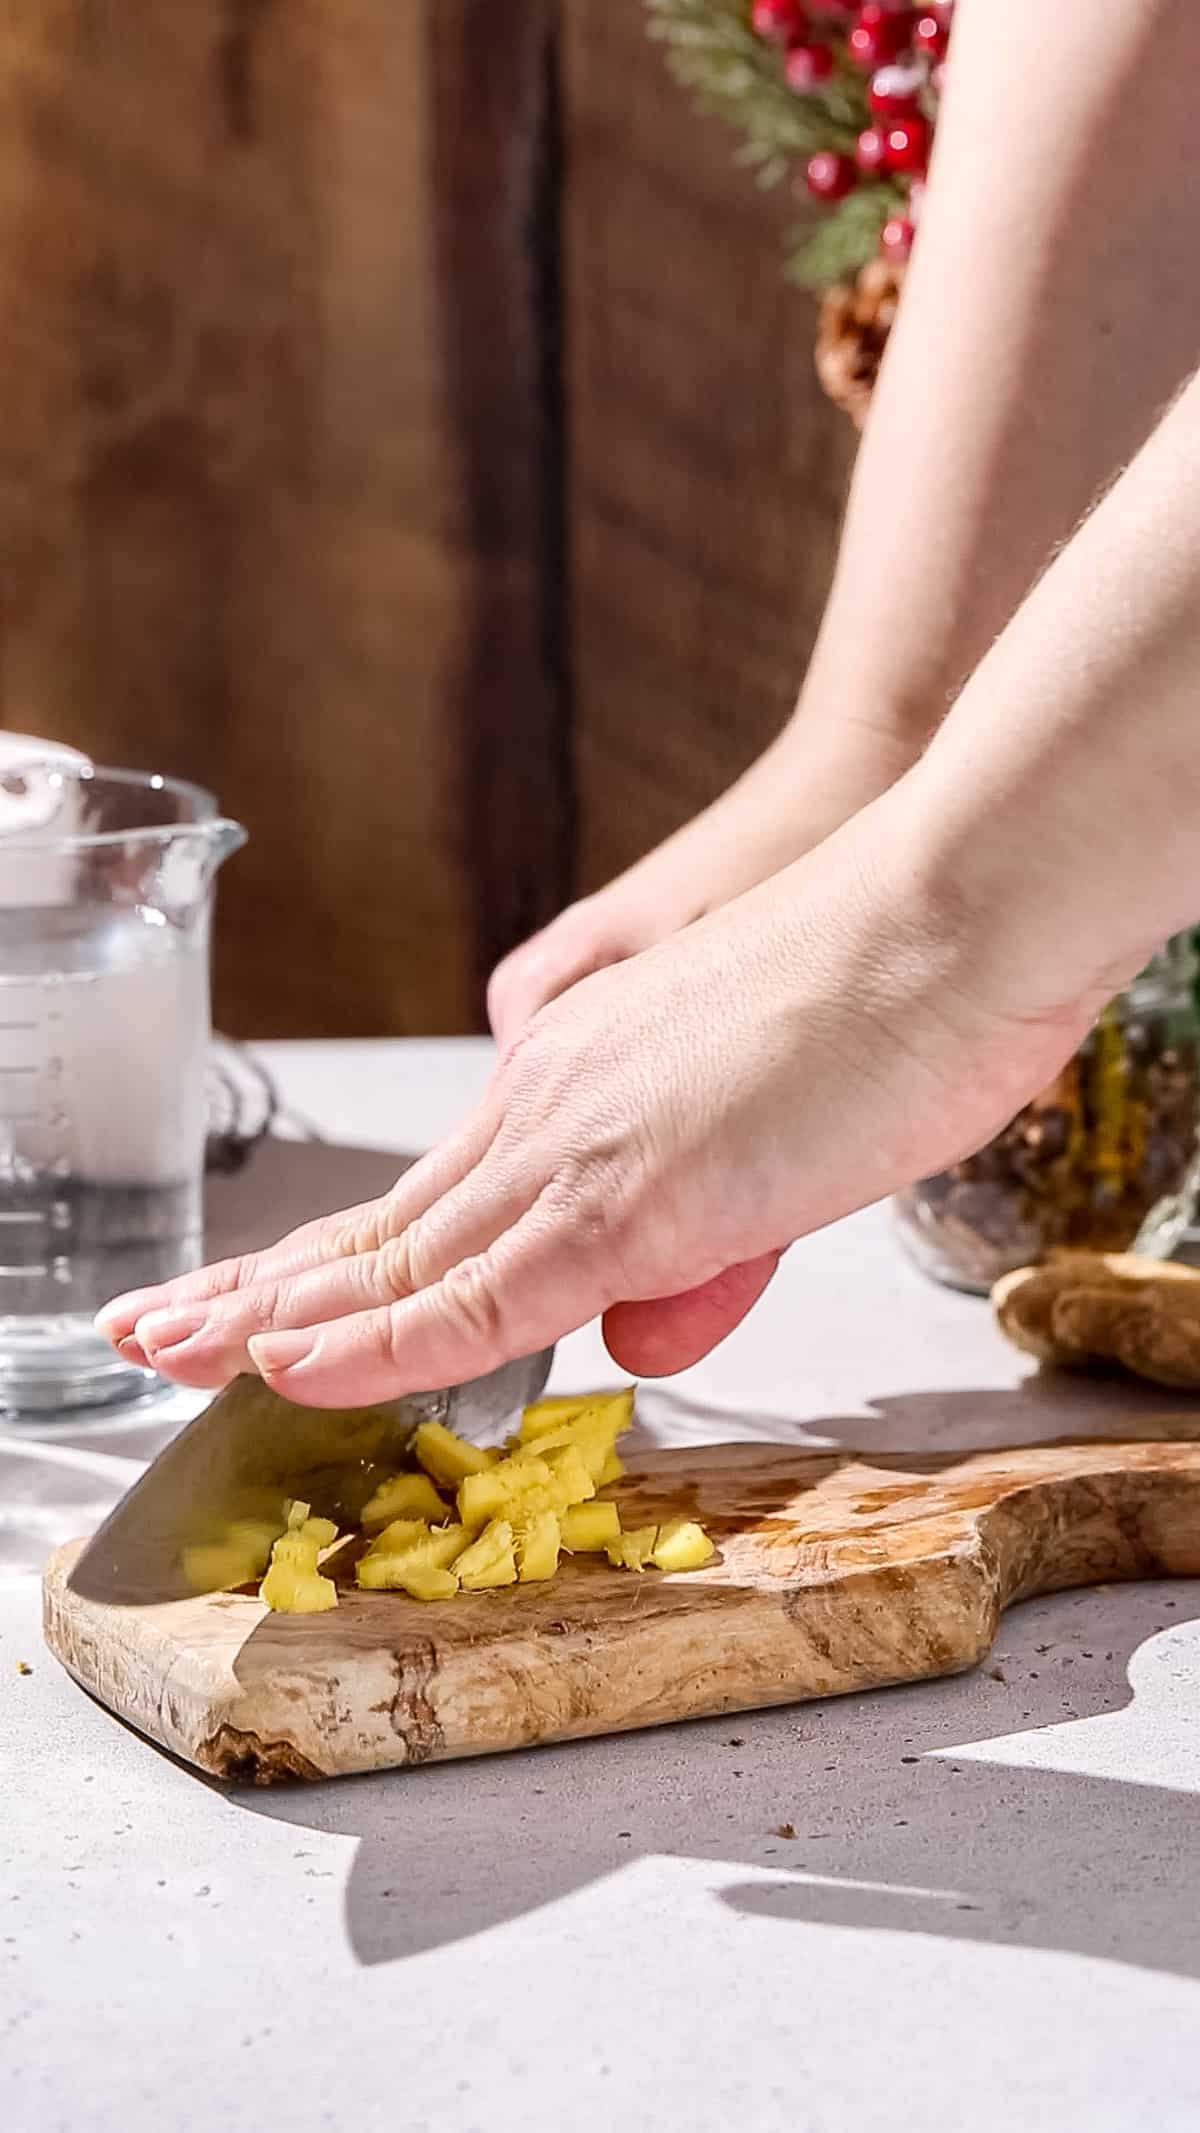 Hands using a knife to chop up fresh ginger.